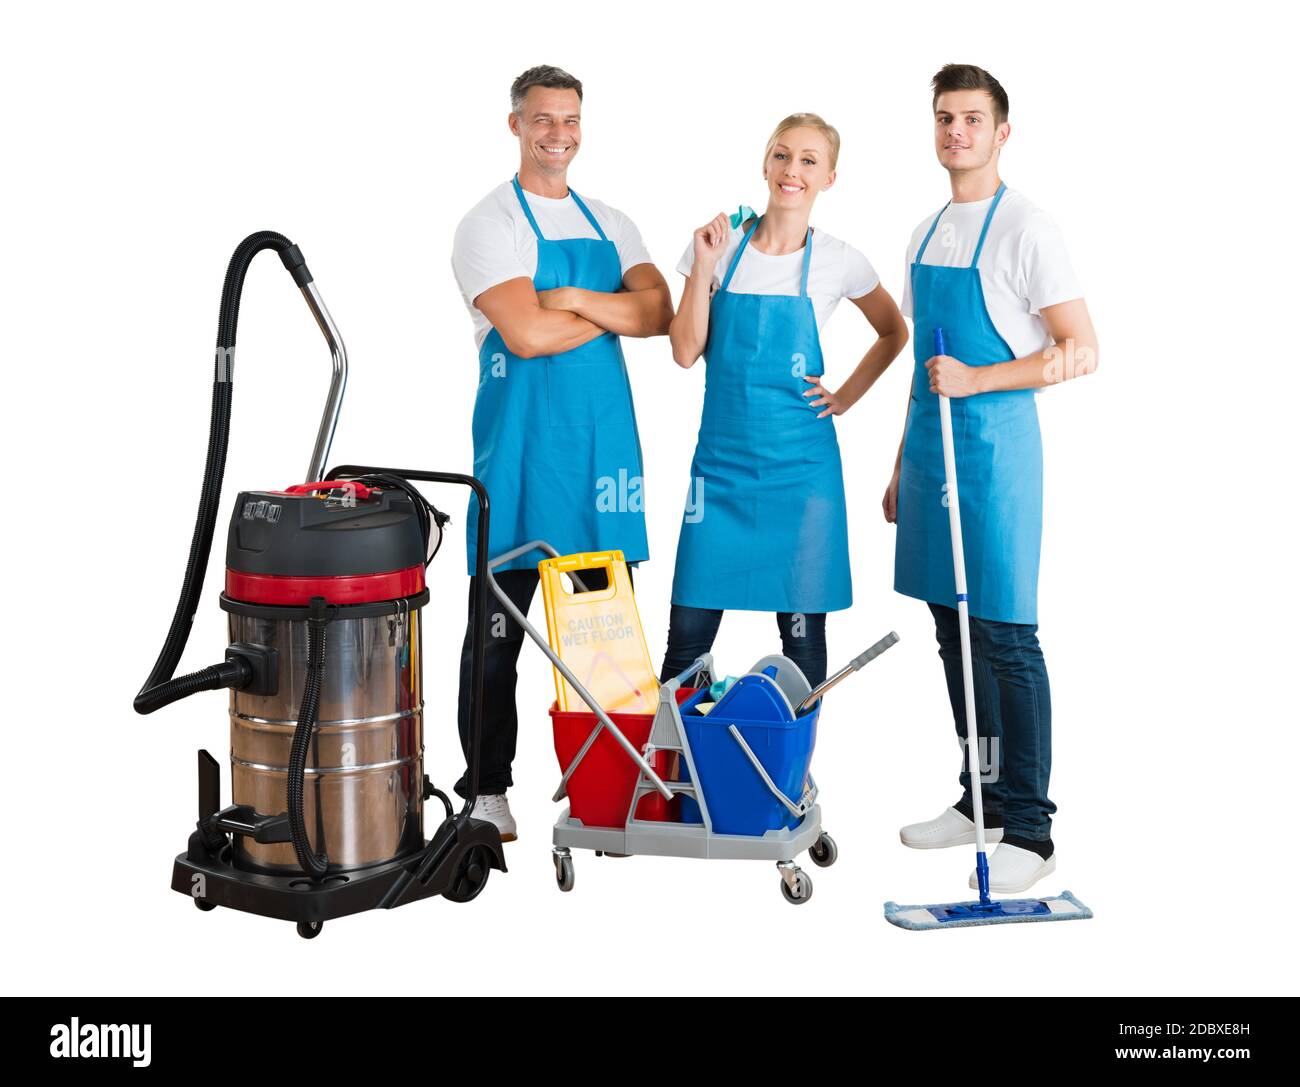 Cleaning Service Professional Janitor Team Or Cleaner Group Stock Photo